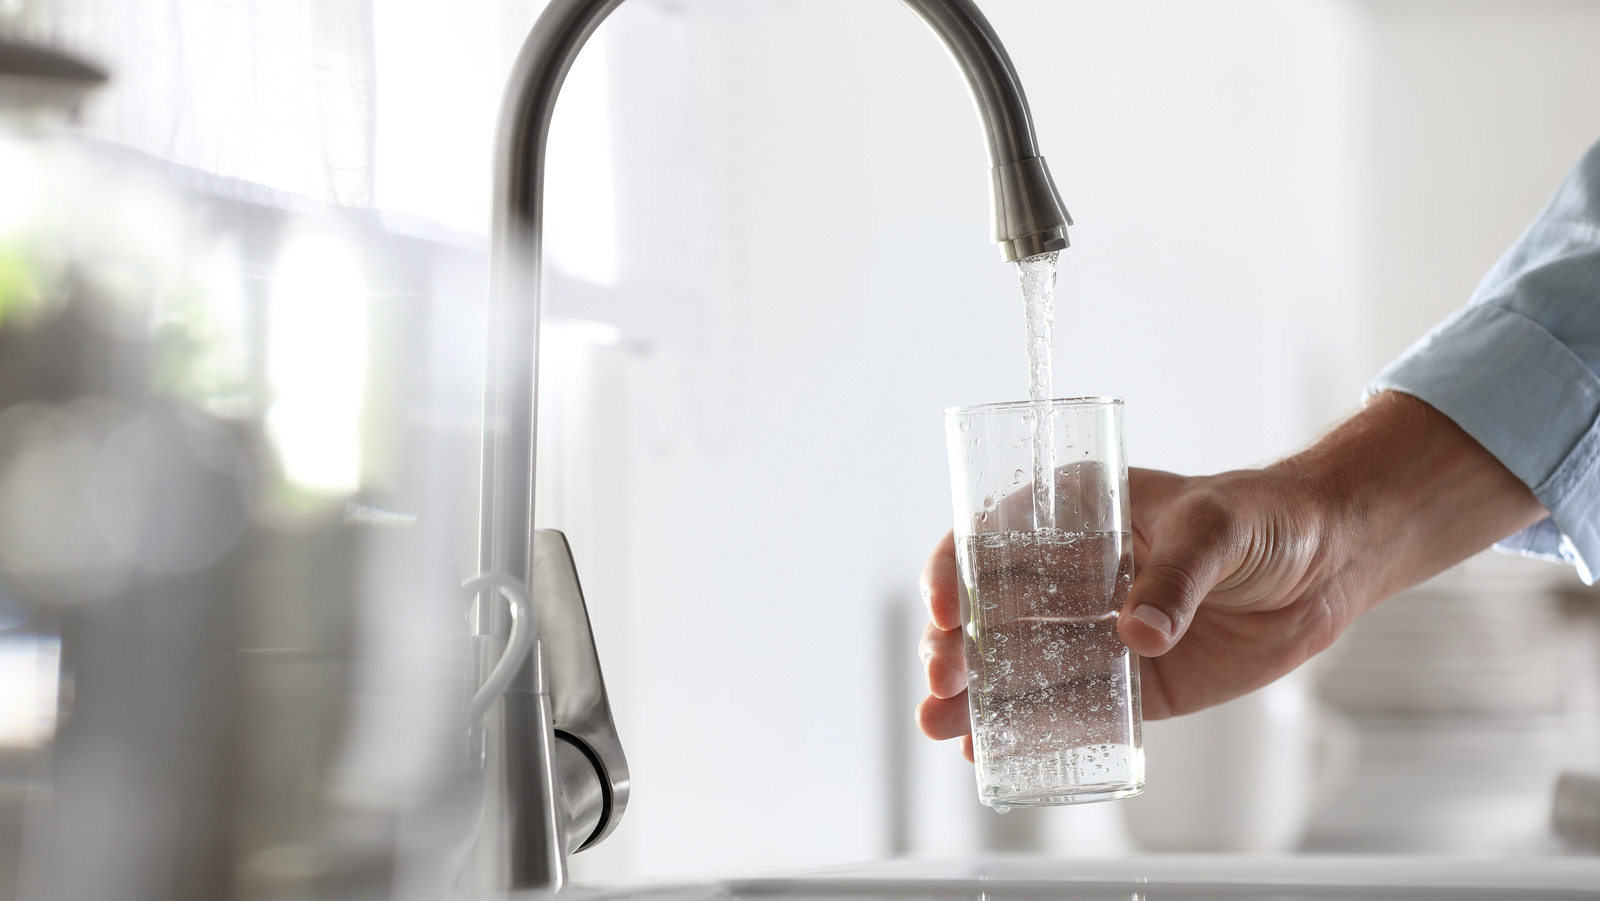 Is It Safe To Drink Tap Water?